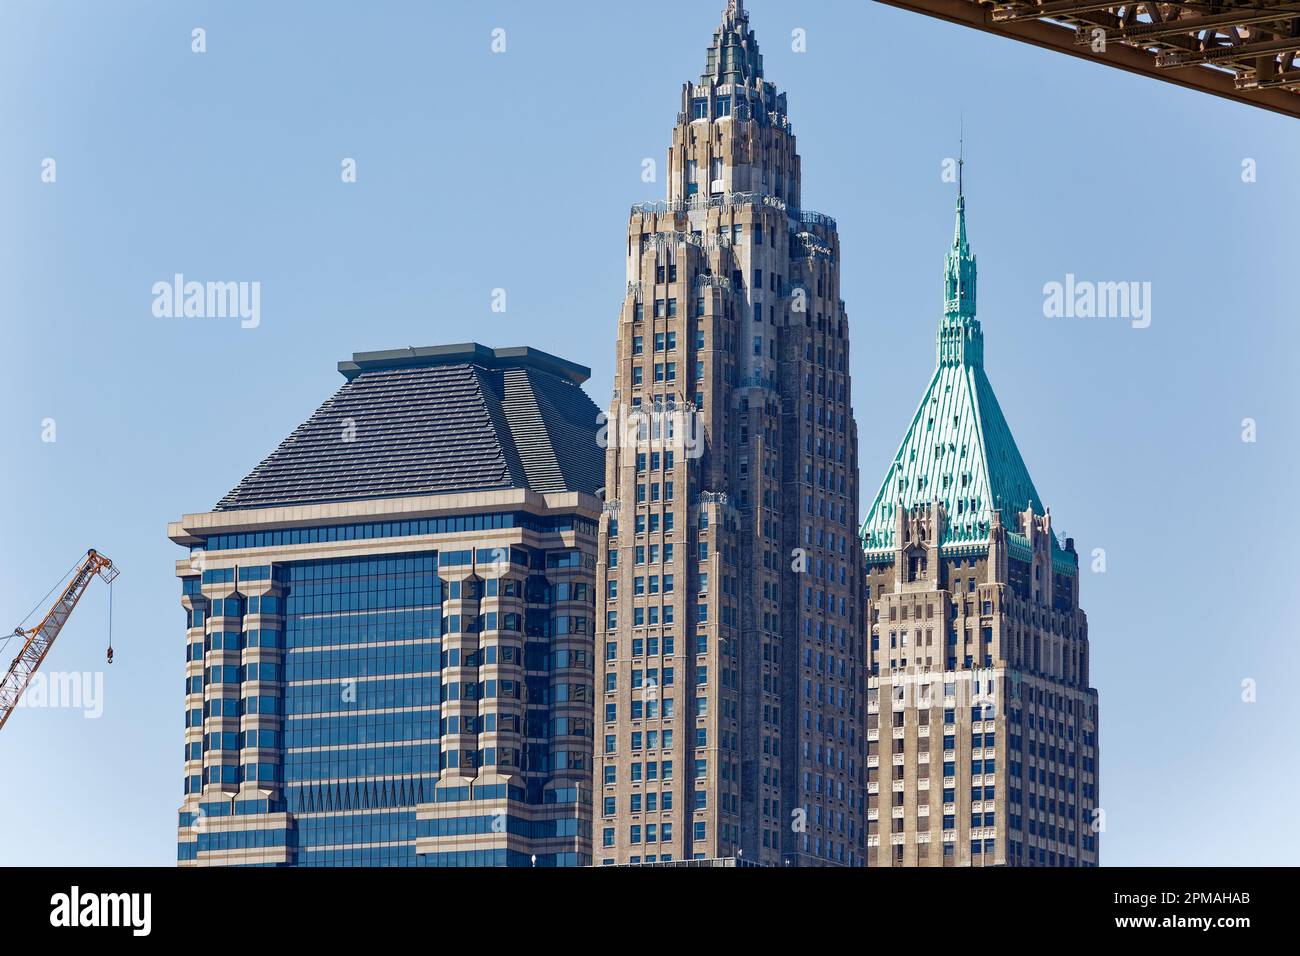 NYC Financial District icons: 60 Wall Street (Deutsch Bank Building), 70 Pine Street (Cities Service Building) and 40 Wall Street (Trump Building). Stock Photo